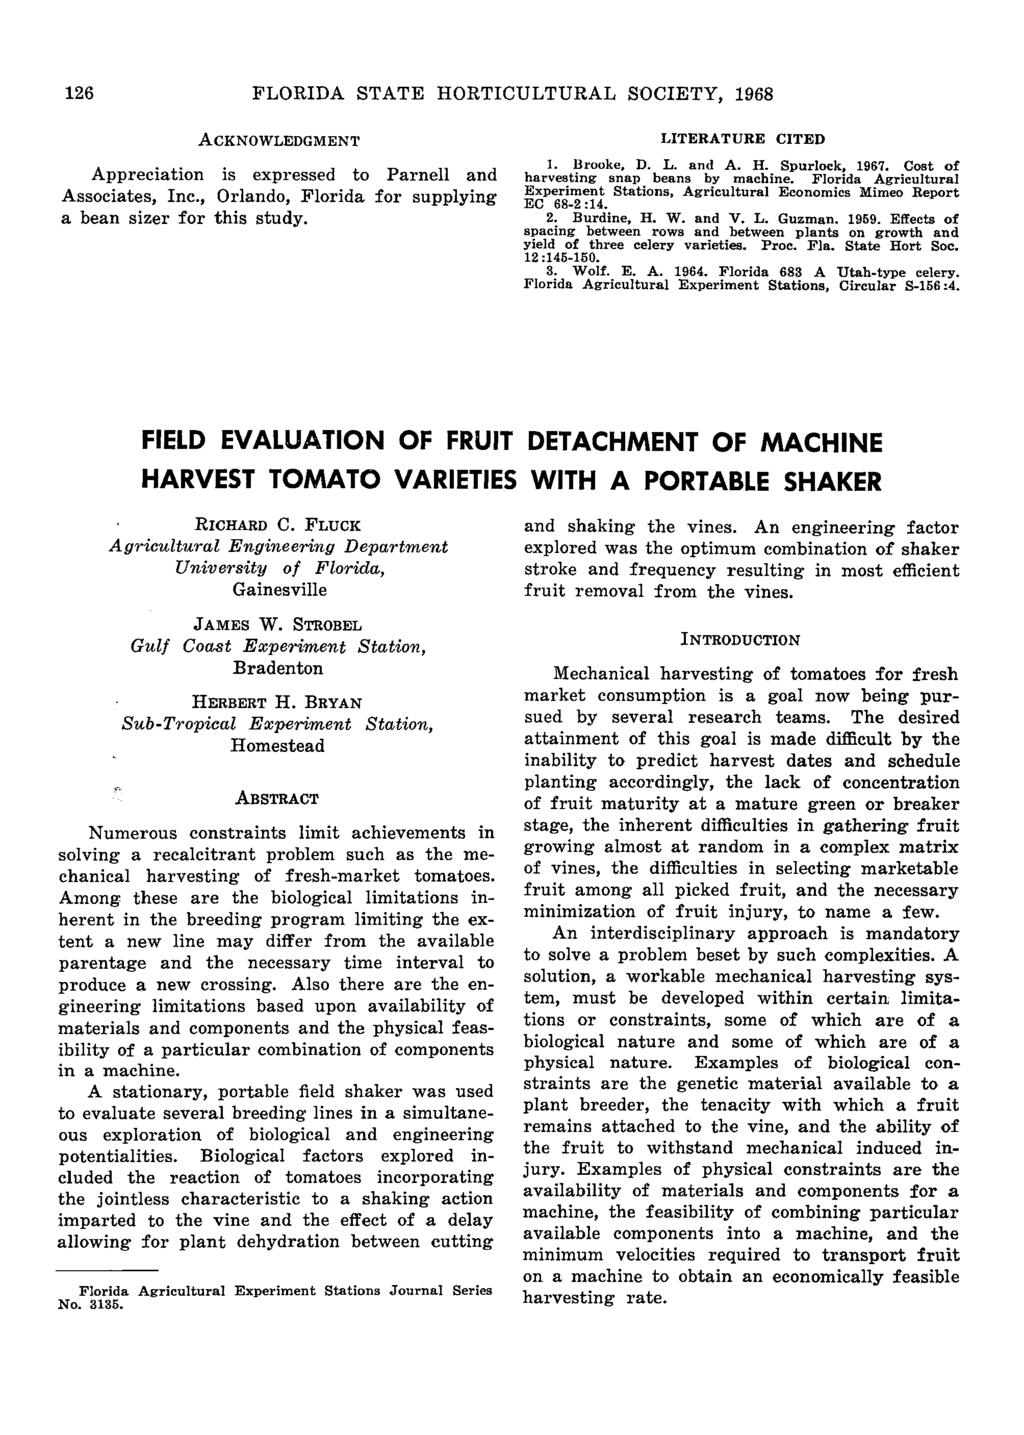 126 FLORIDA STATE HORTICULTURAL SOCIETY, 1968 Acknowledgment LITERATURE CITED Appreciation is expressed to Parnell and Associates, Inc., Orlando, Florida for supplying a bean sizer for this study. 1. Brooke, D.